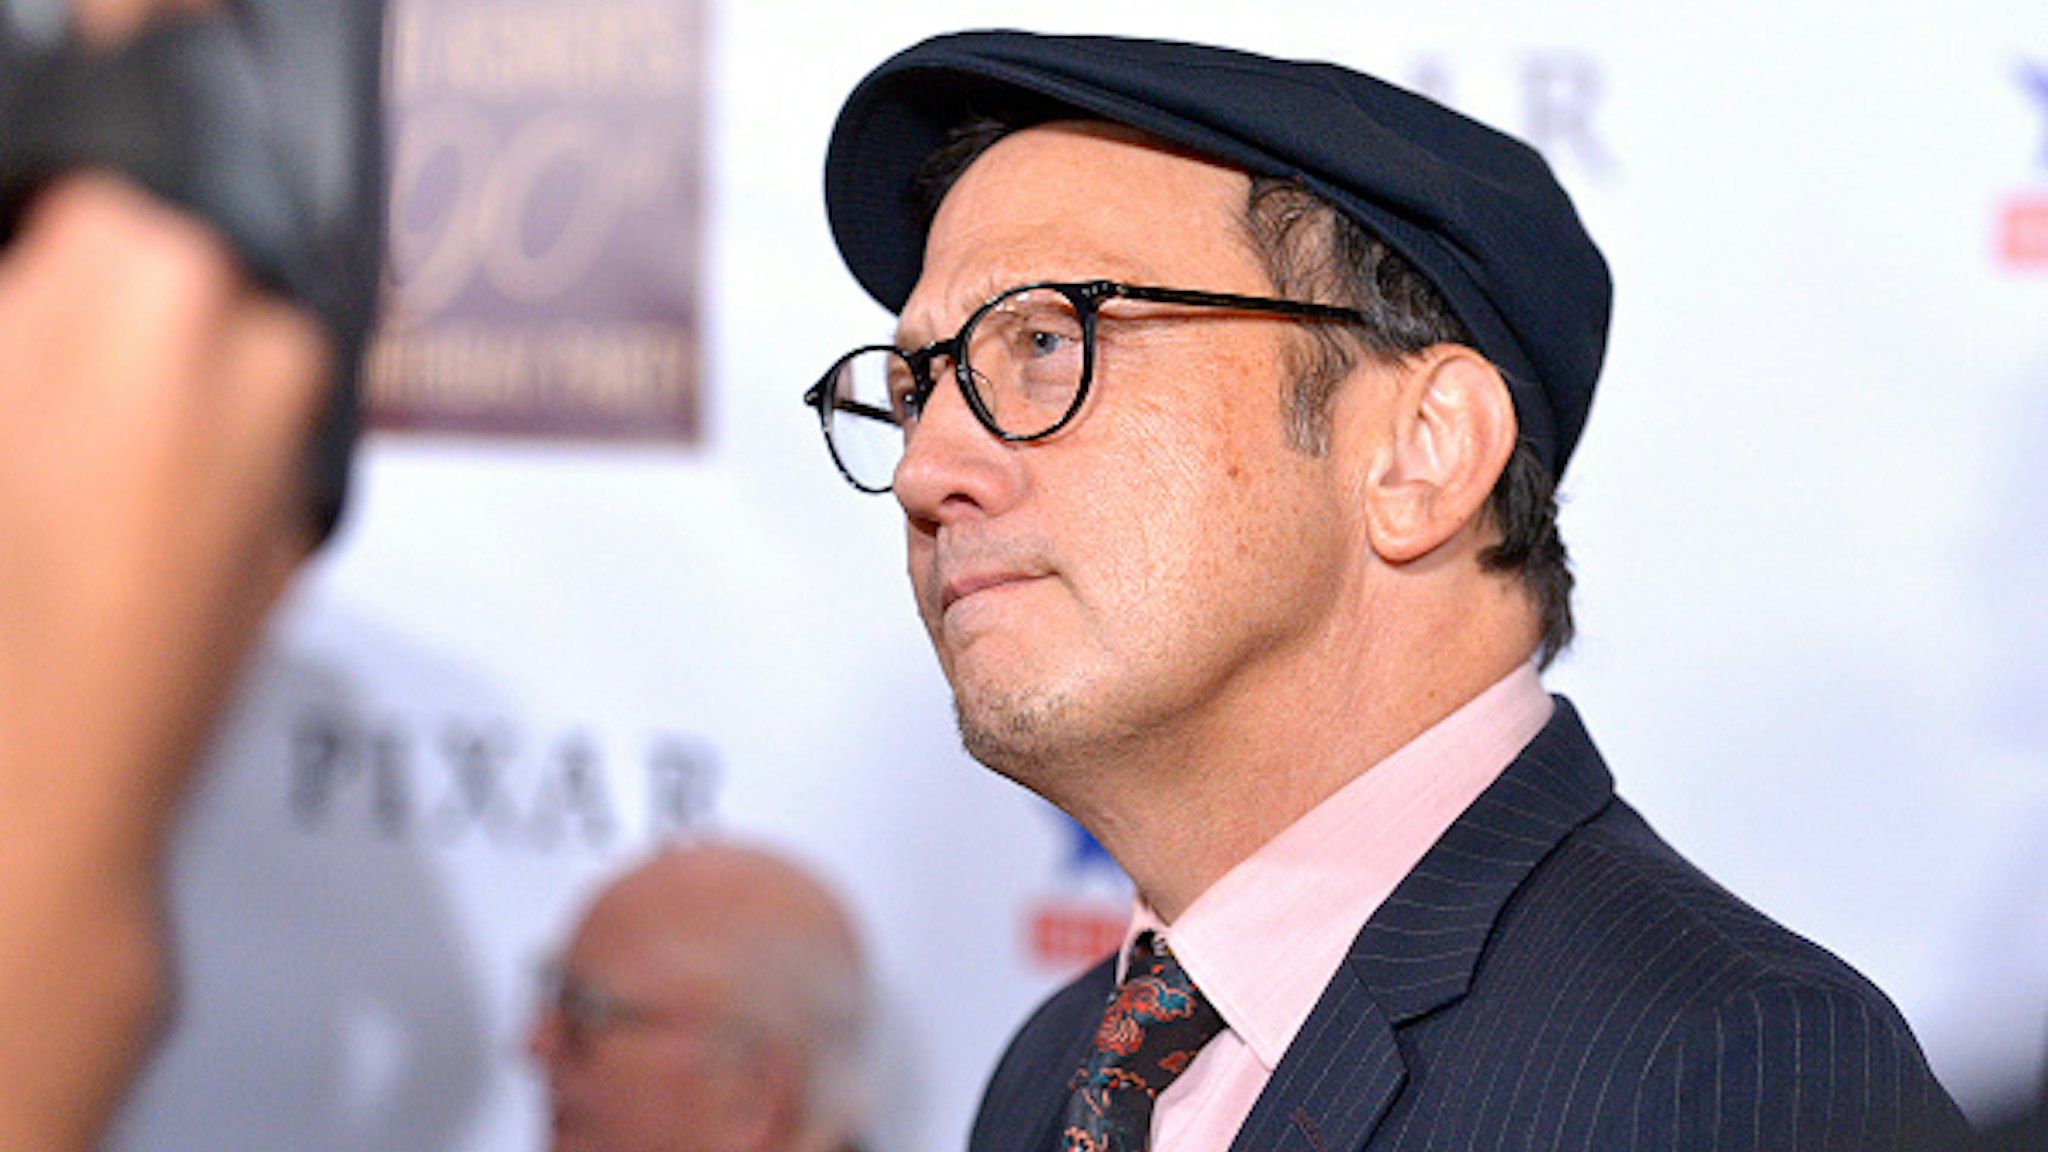 HOLLYWOOD, CALIFORNIA - NOVEMBER 03: Actor Rob Schneider attends Ed Asner's 90th Birthday Party and Celebrity Roast at The Roosevelt Hotel on November 03, 2019 in Hollywood, California.